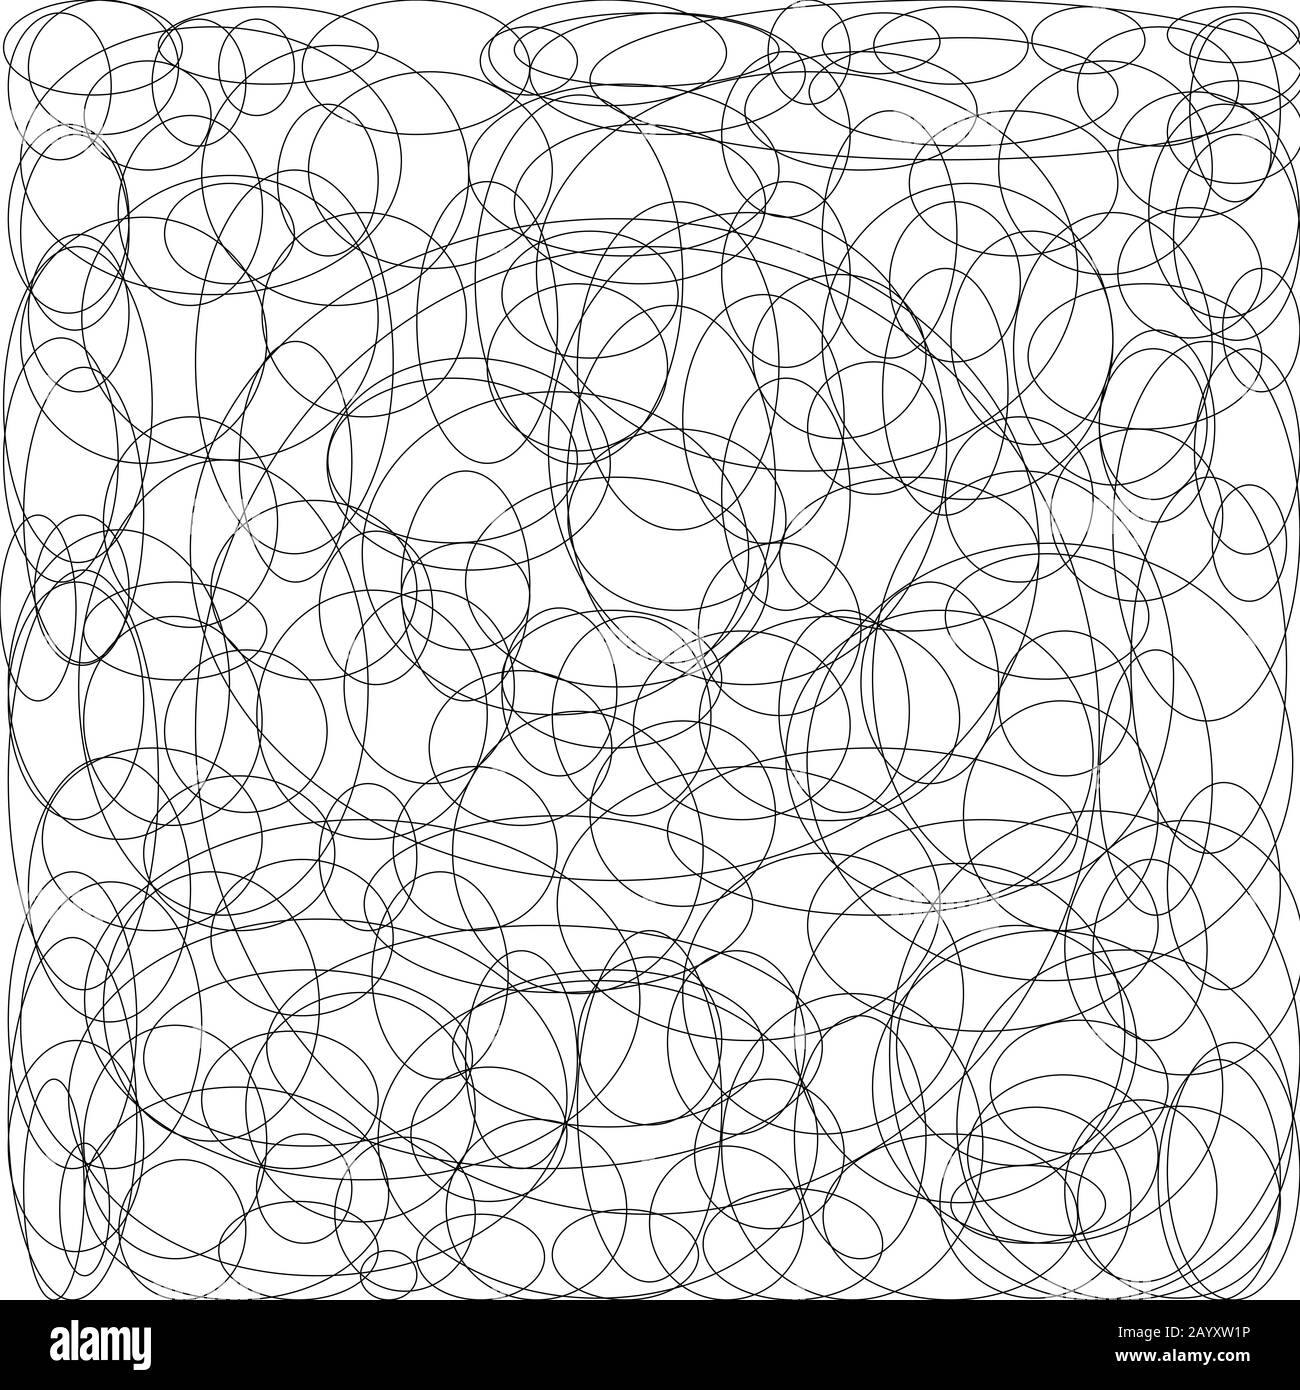 A messy chaotic overlapping round shape doodle background. Stock Photo